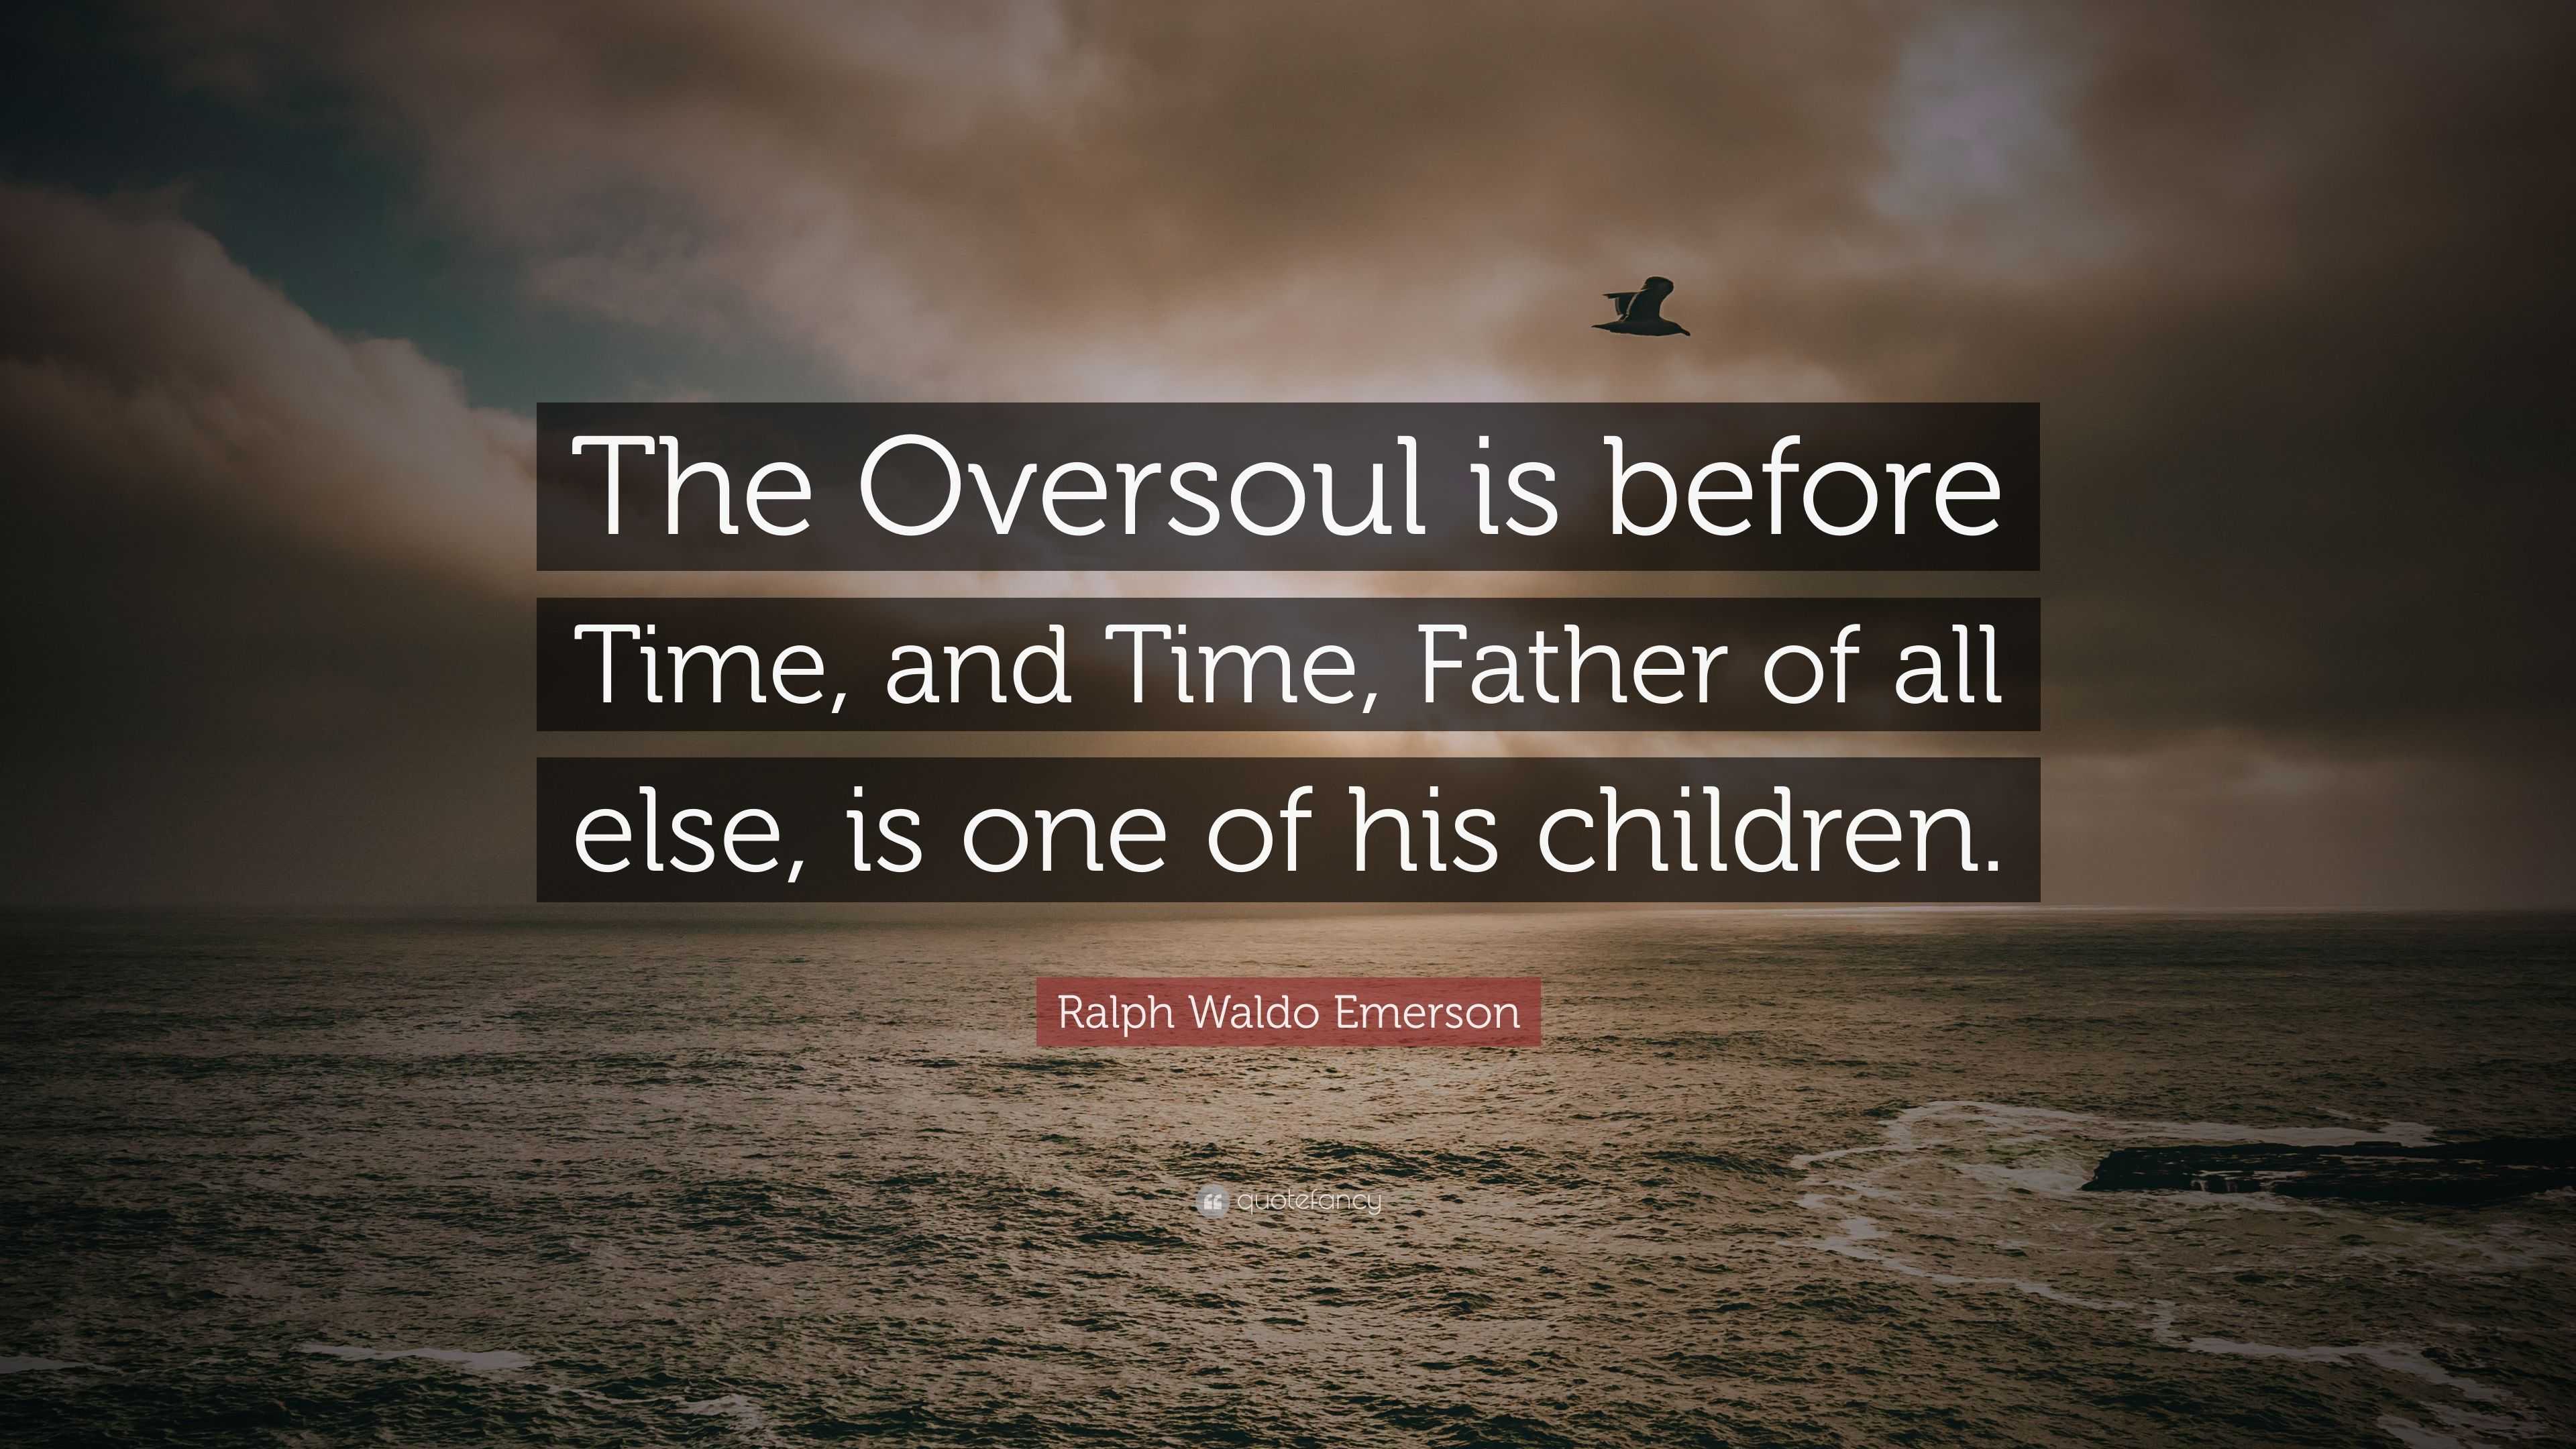 emerson essay the oversoul